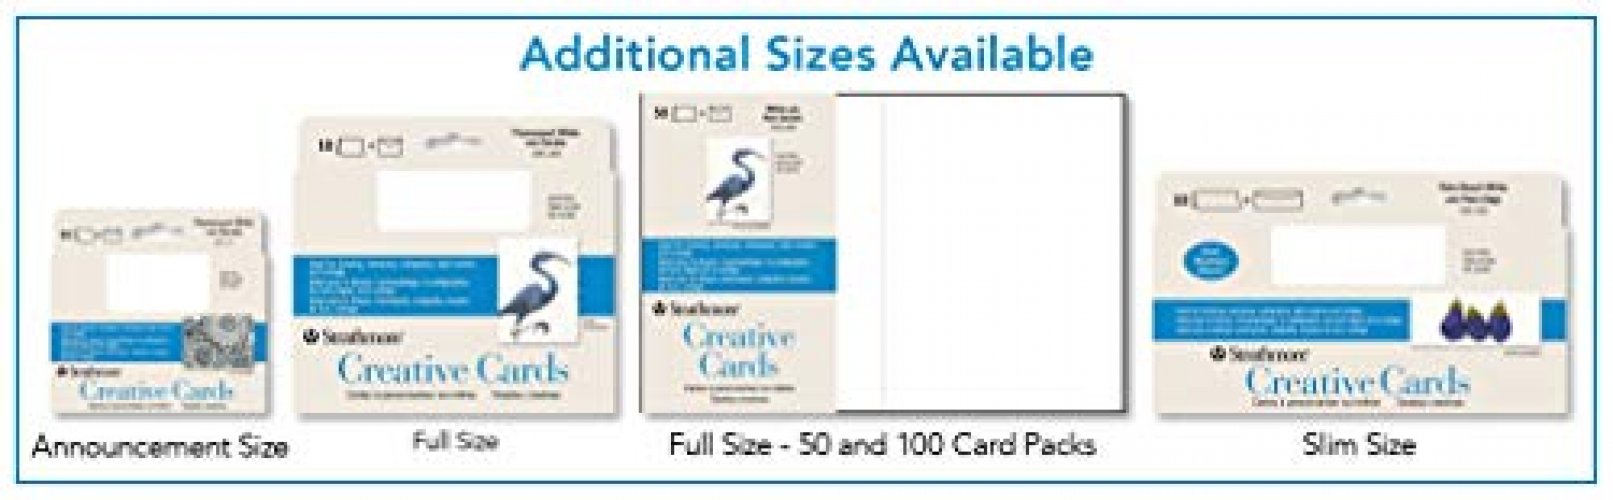 Strathmore Creative Cards Fluorescent White 50 Pack